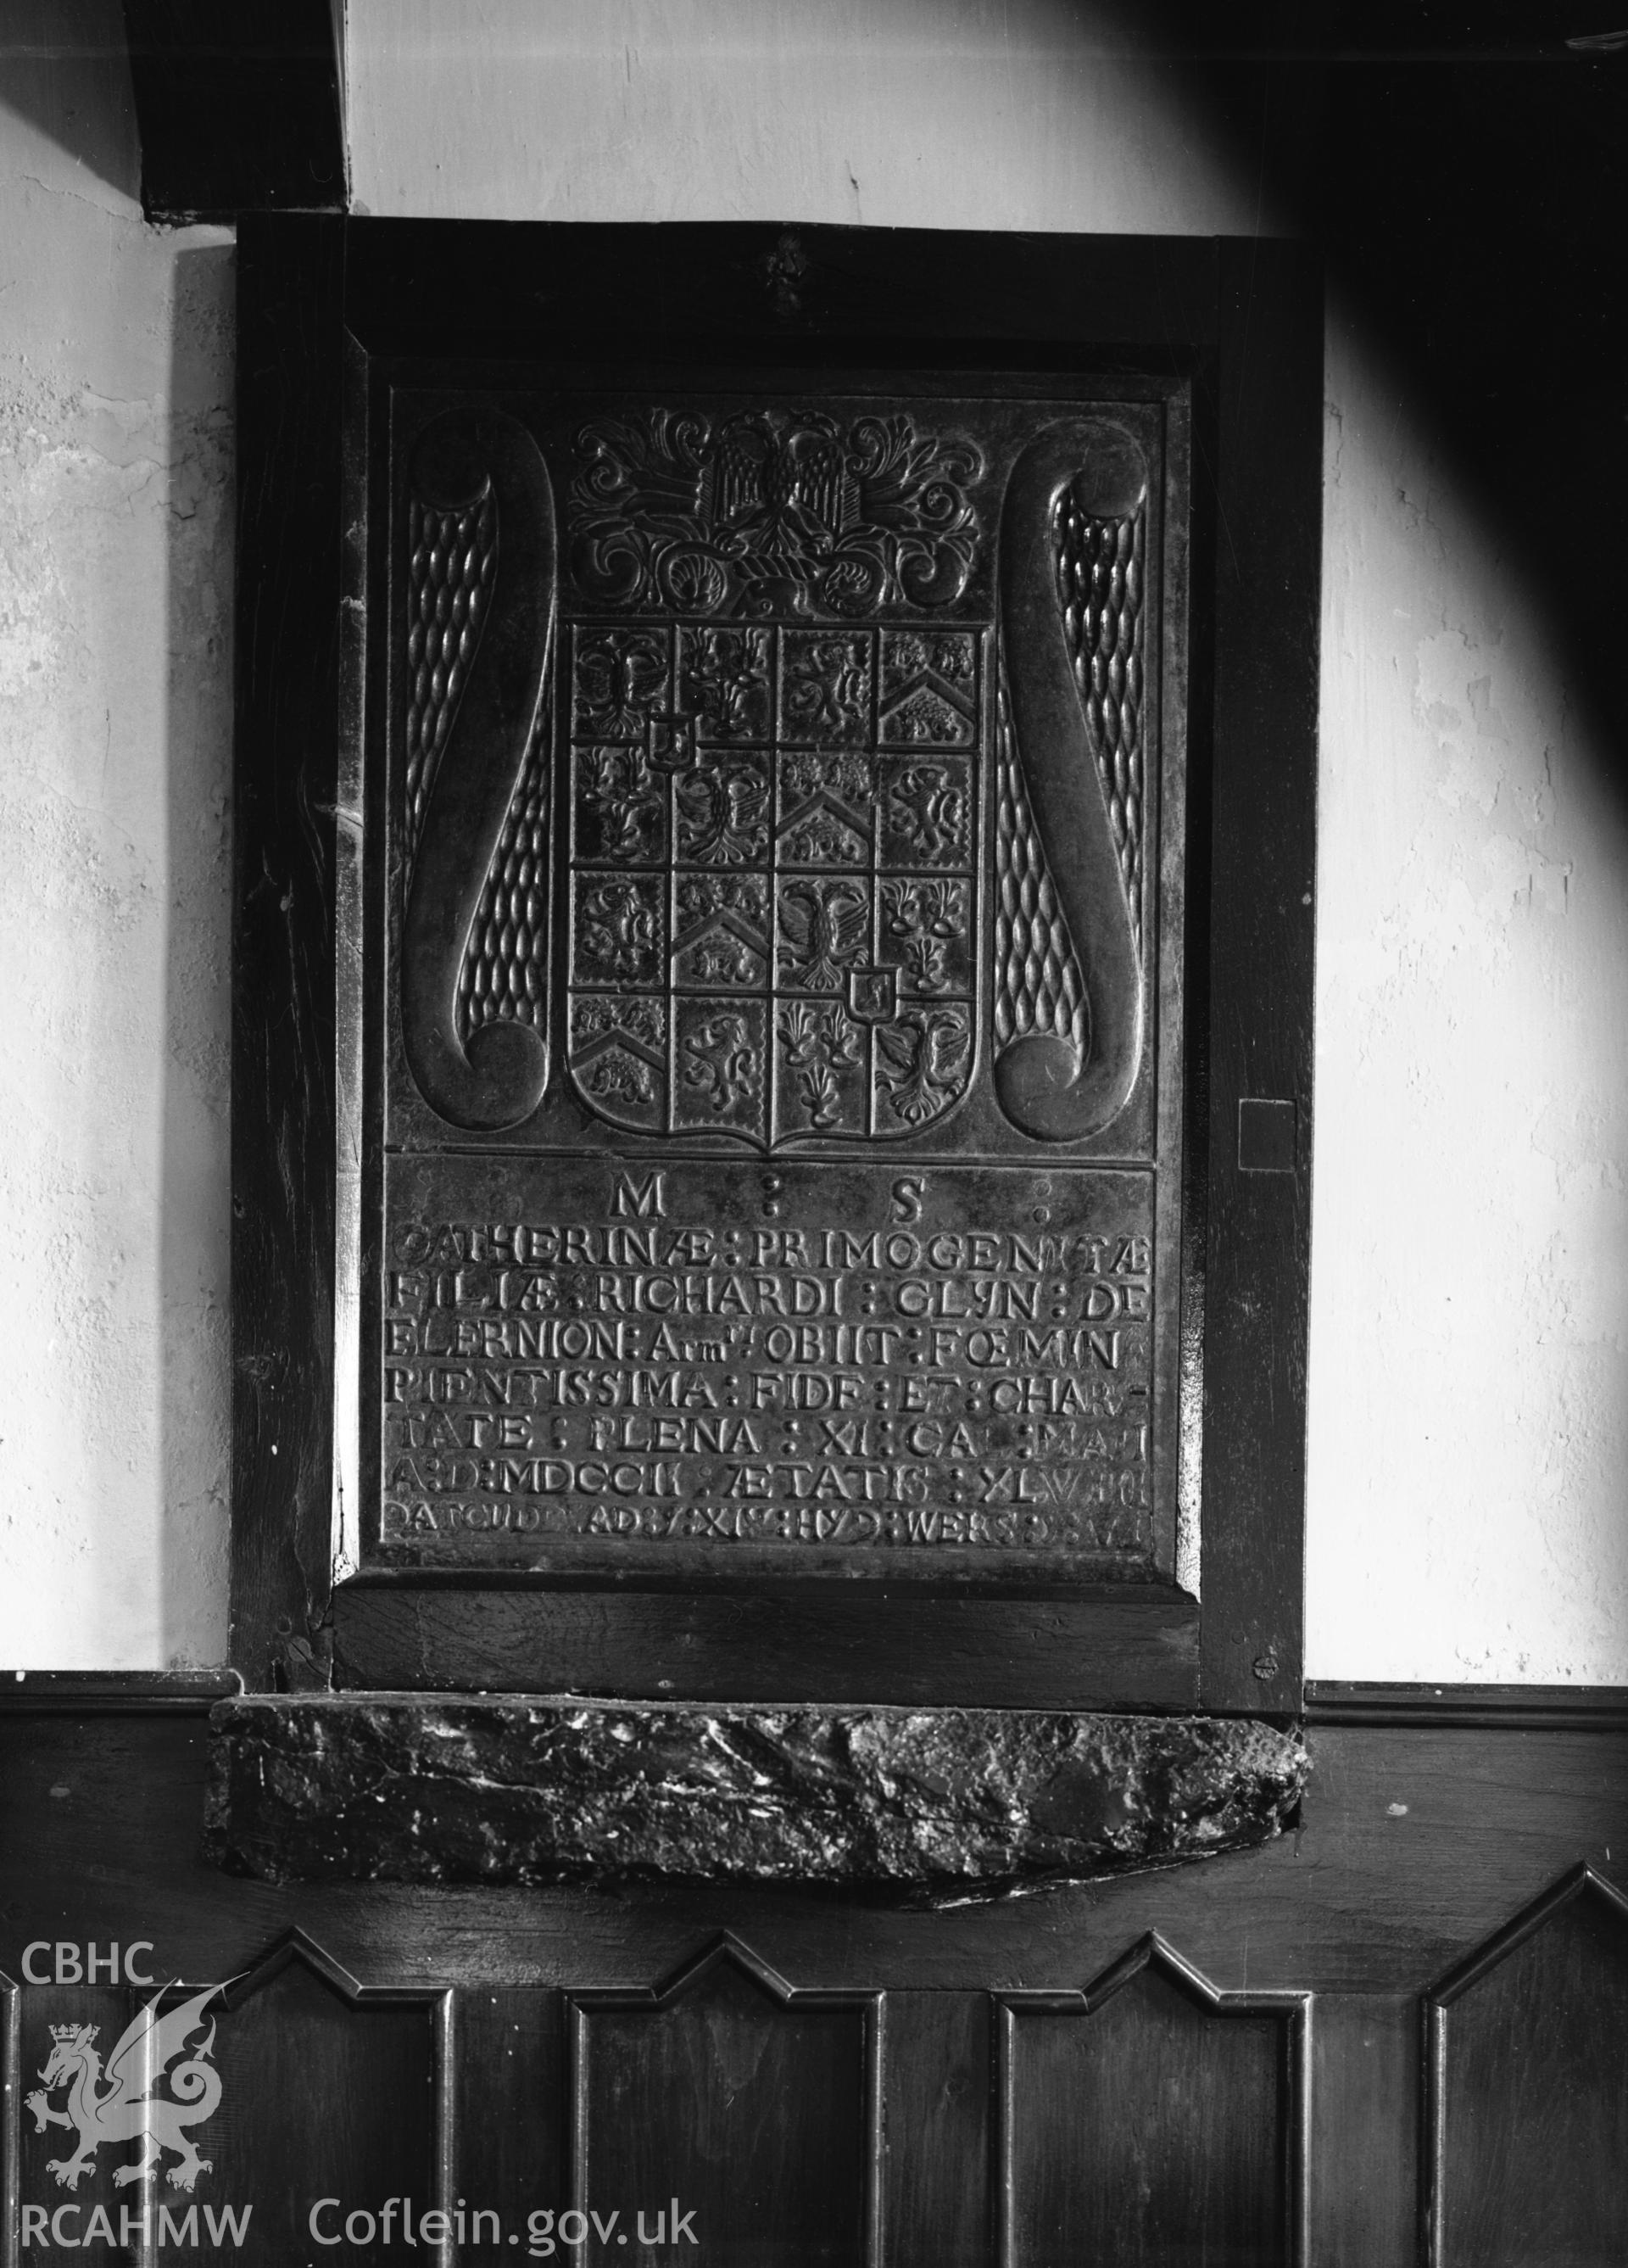 Interior view showing the slate memorial.